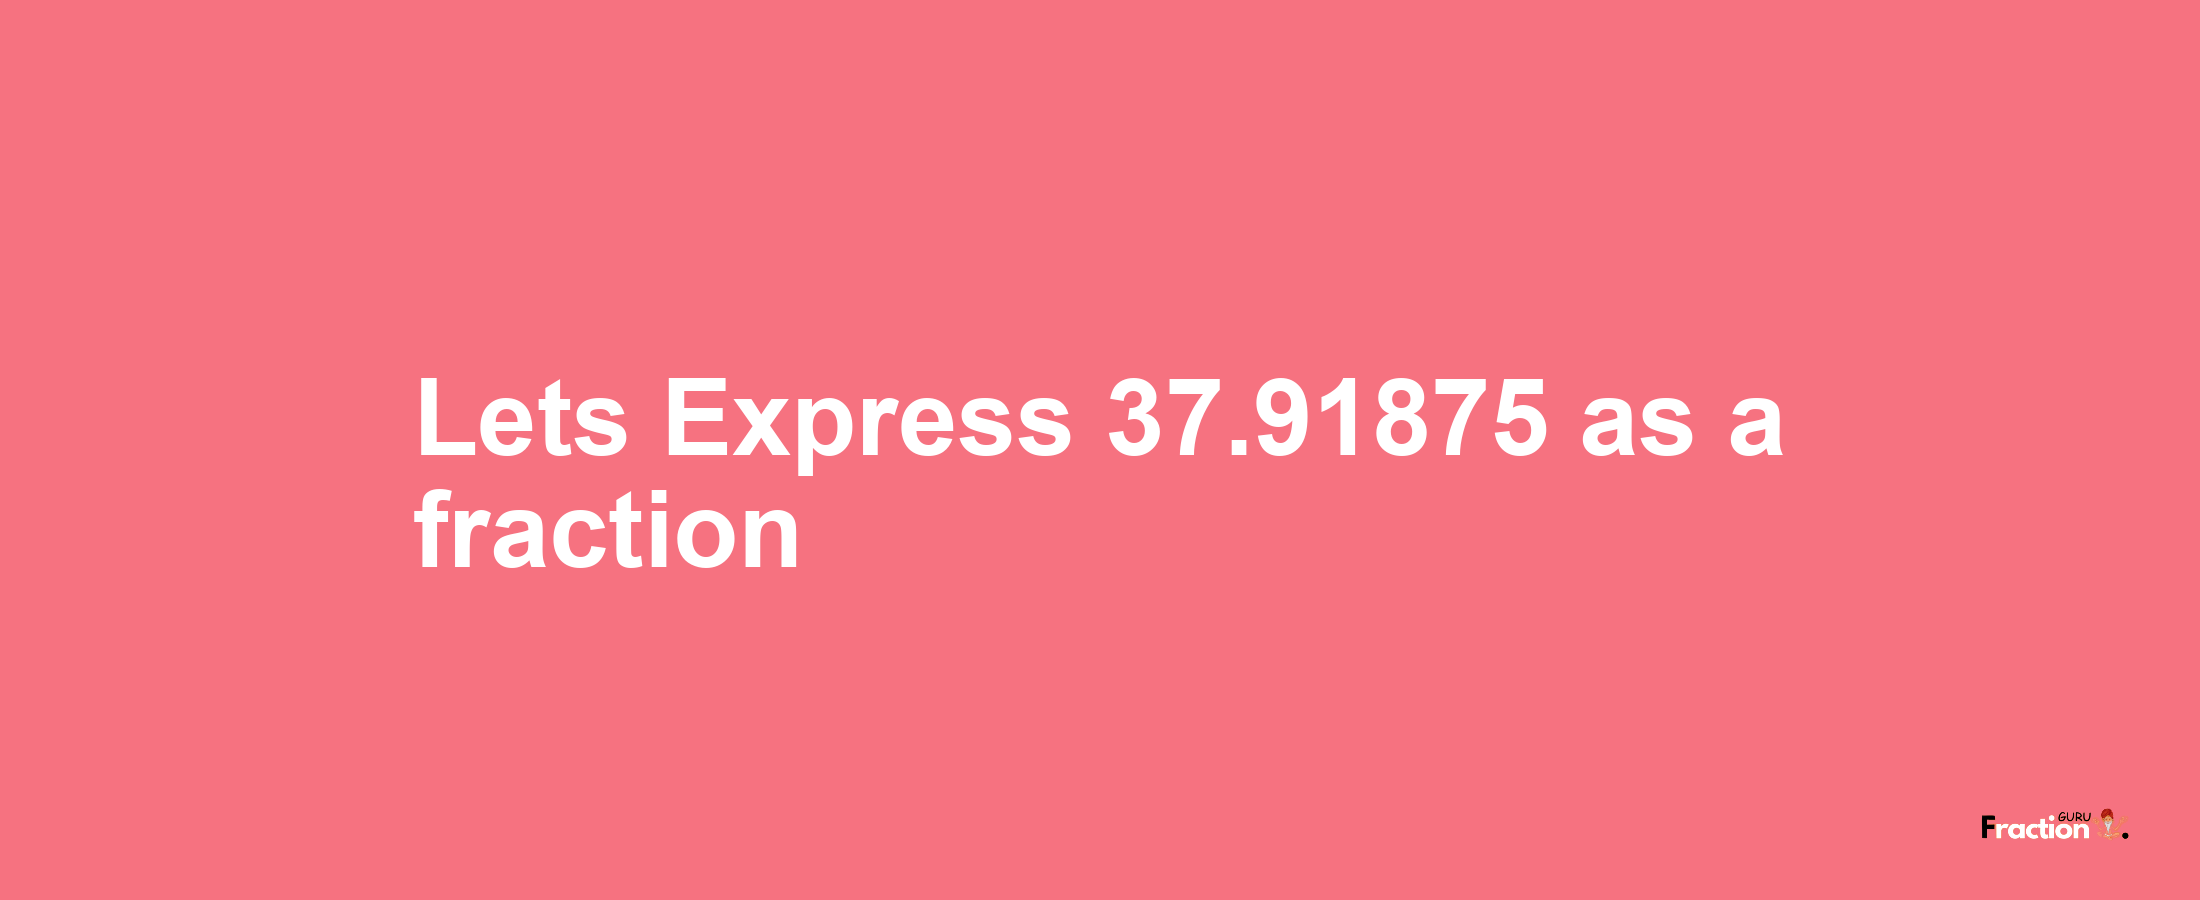 Lets Express 37.91875 as afraction